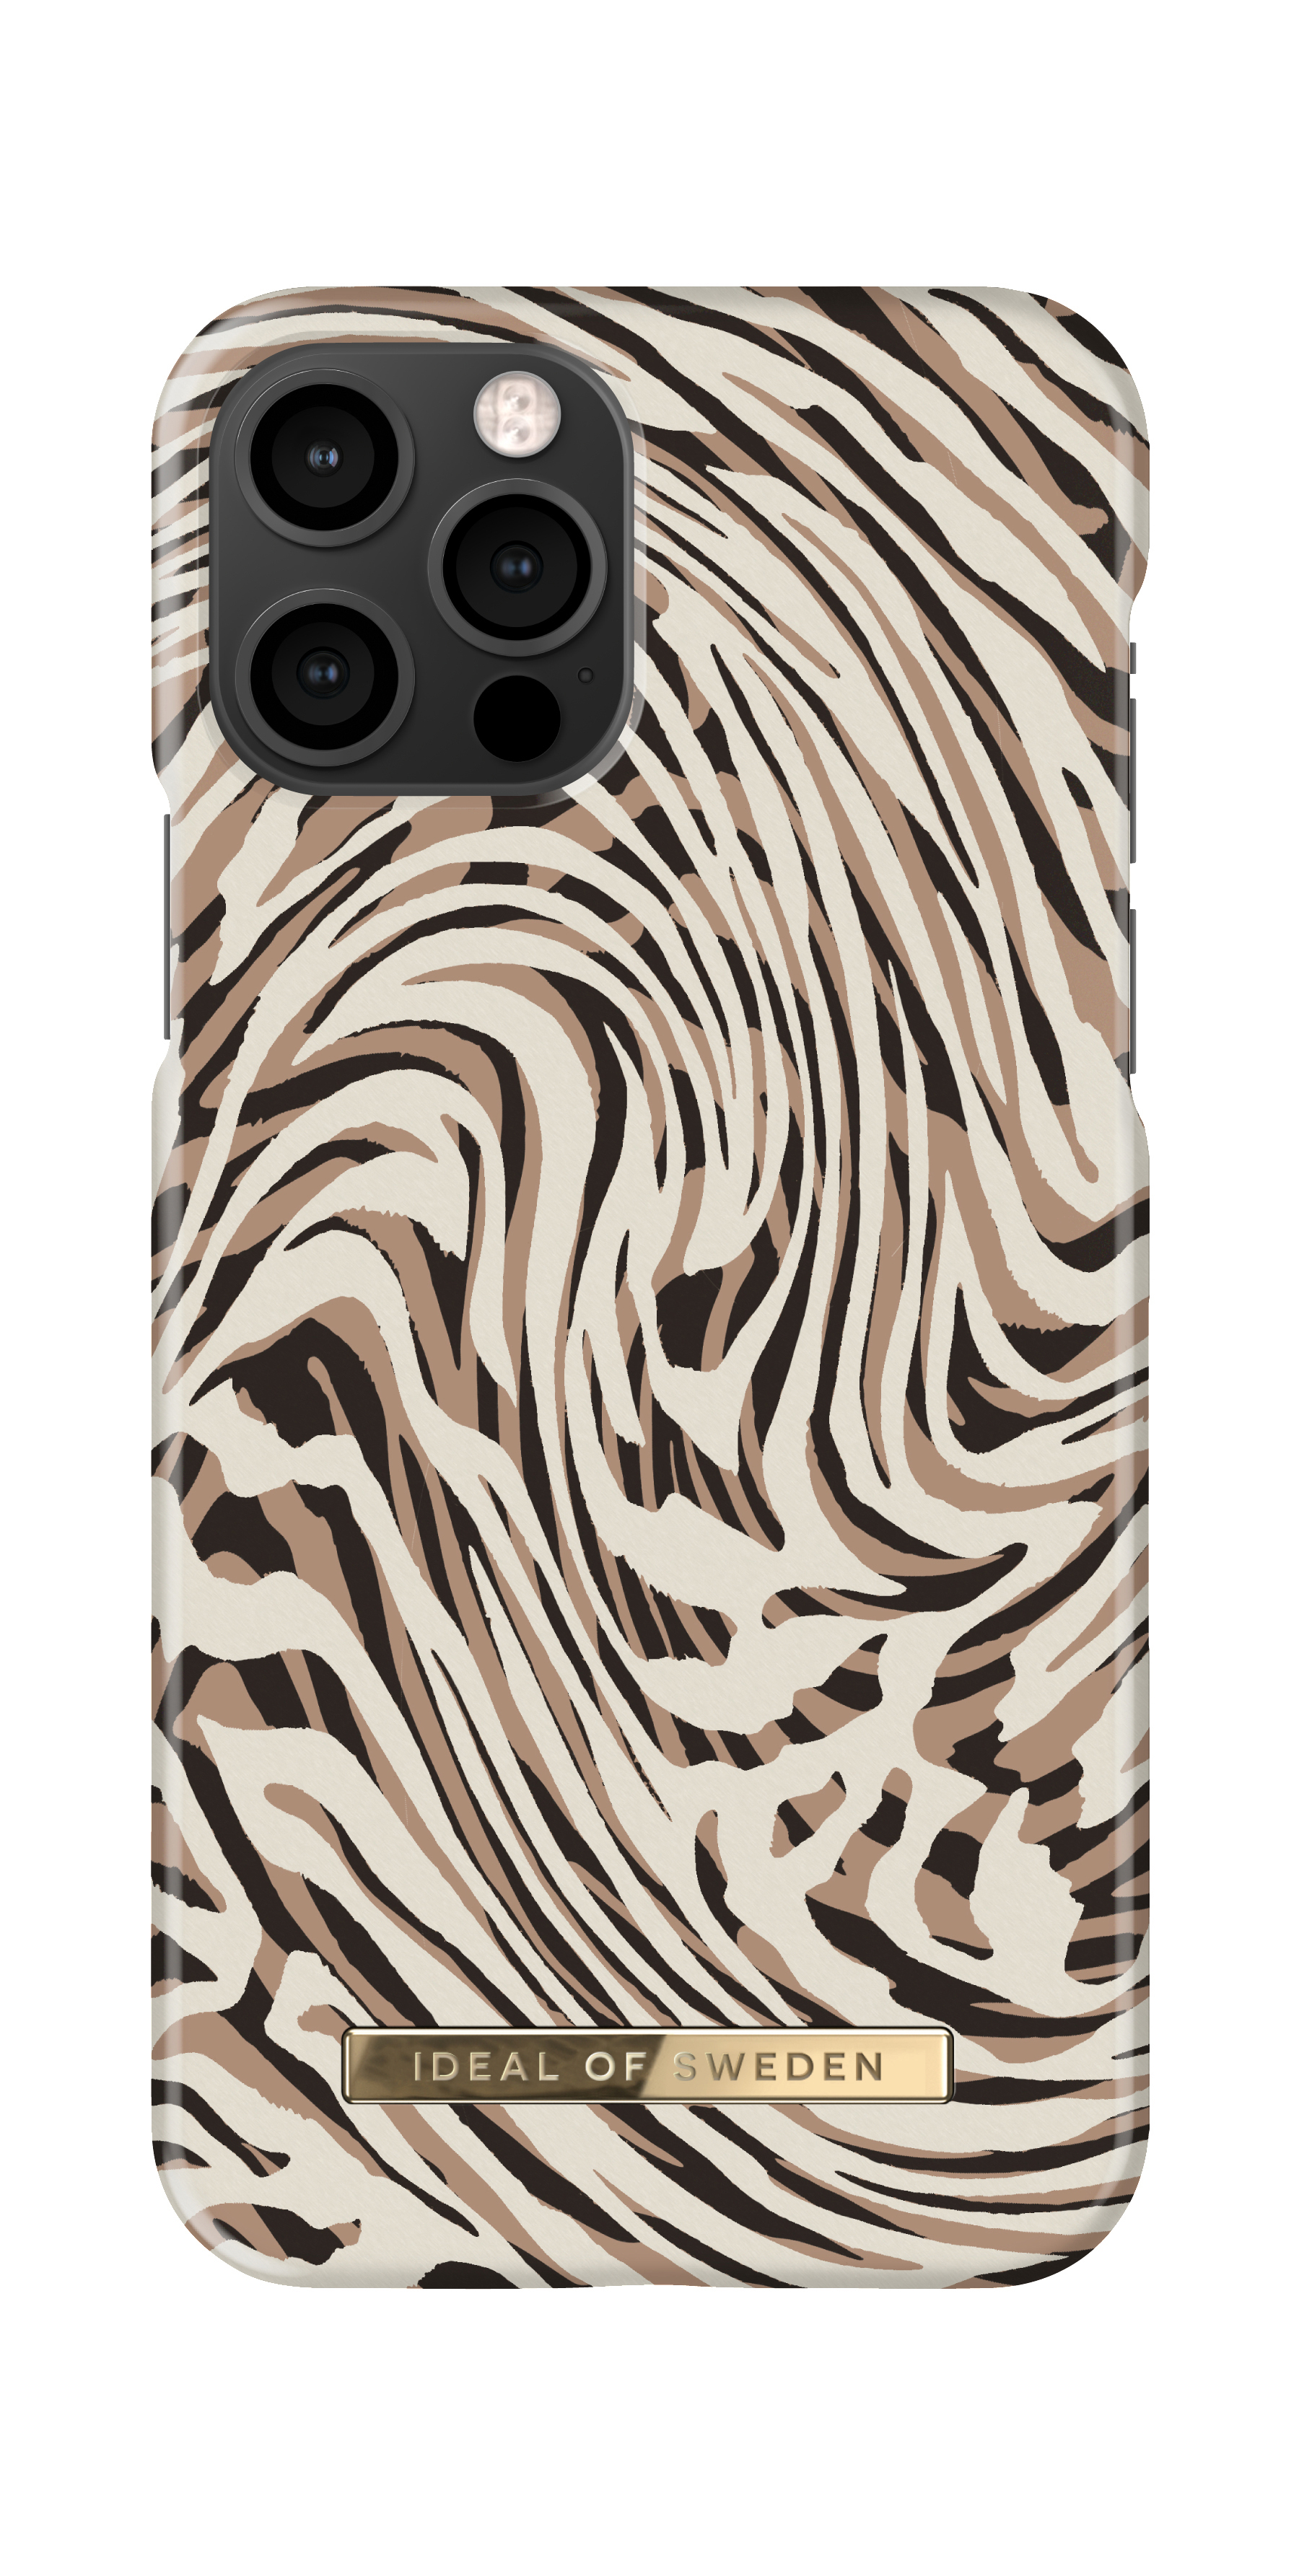 12/12Pro, Hypnotic Apple, Zebra SWEDEN iPhone IDFCSS22-I2061-392, OF Backcover, IDEAL